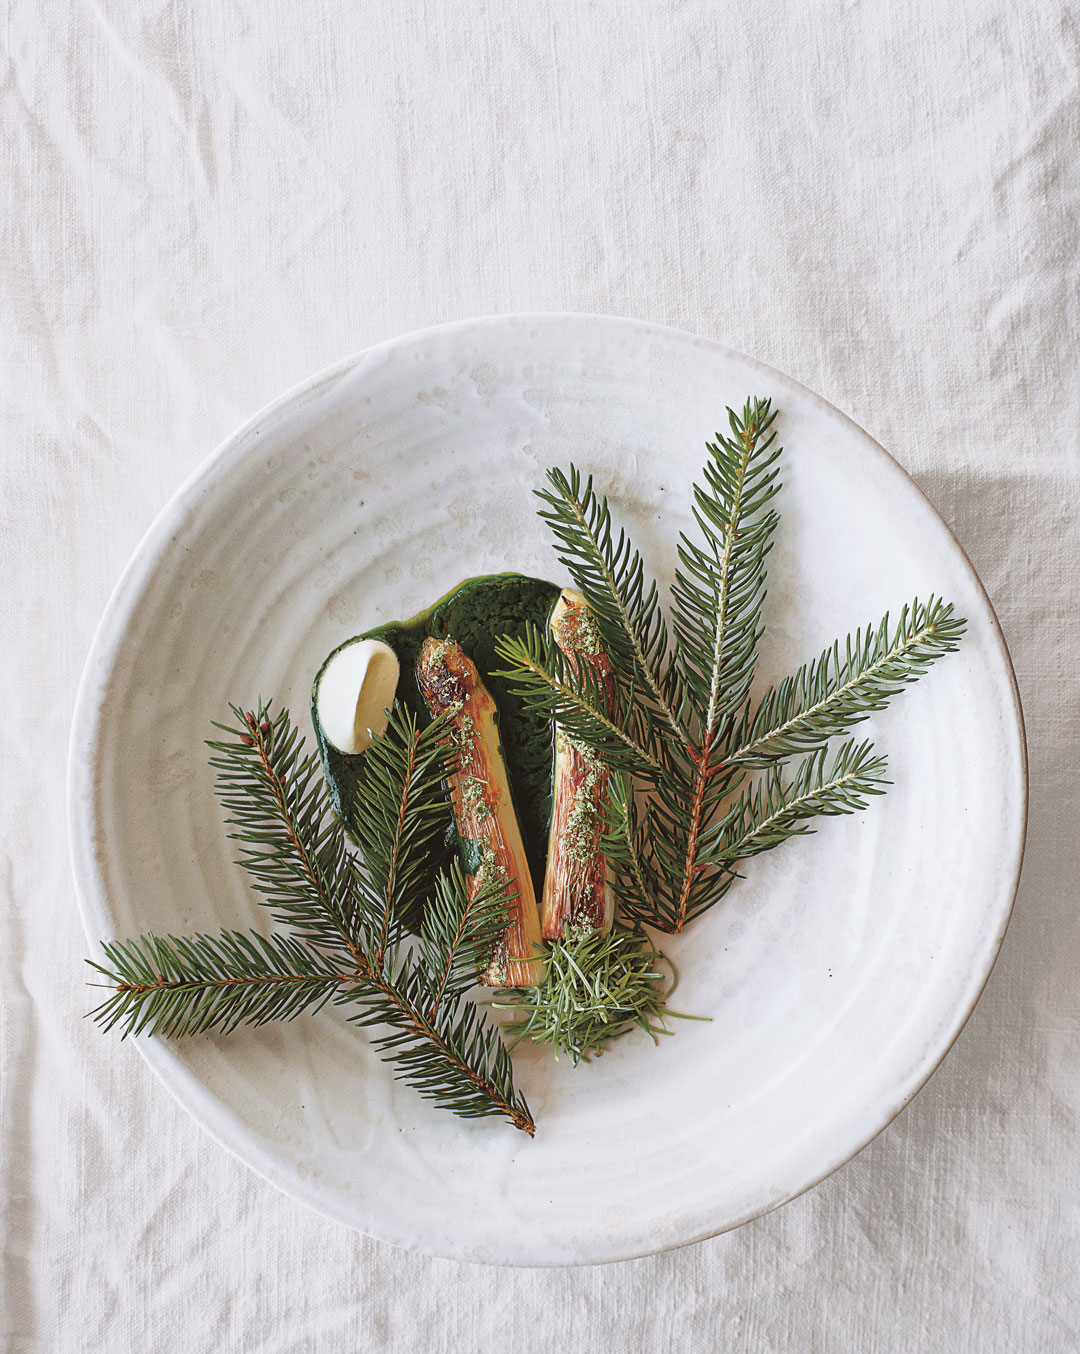 Grilled asparagus and tender spruce. From A Work in Progress: A Journal 